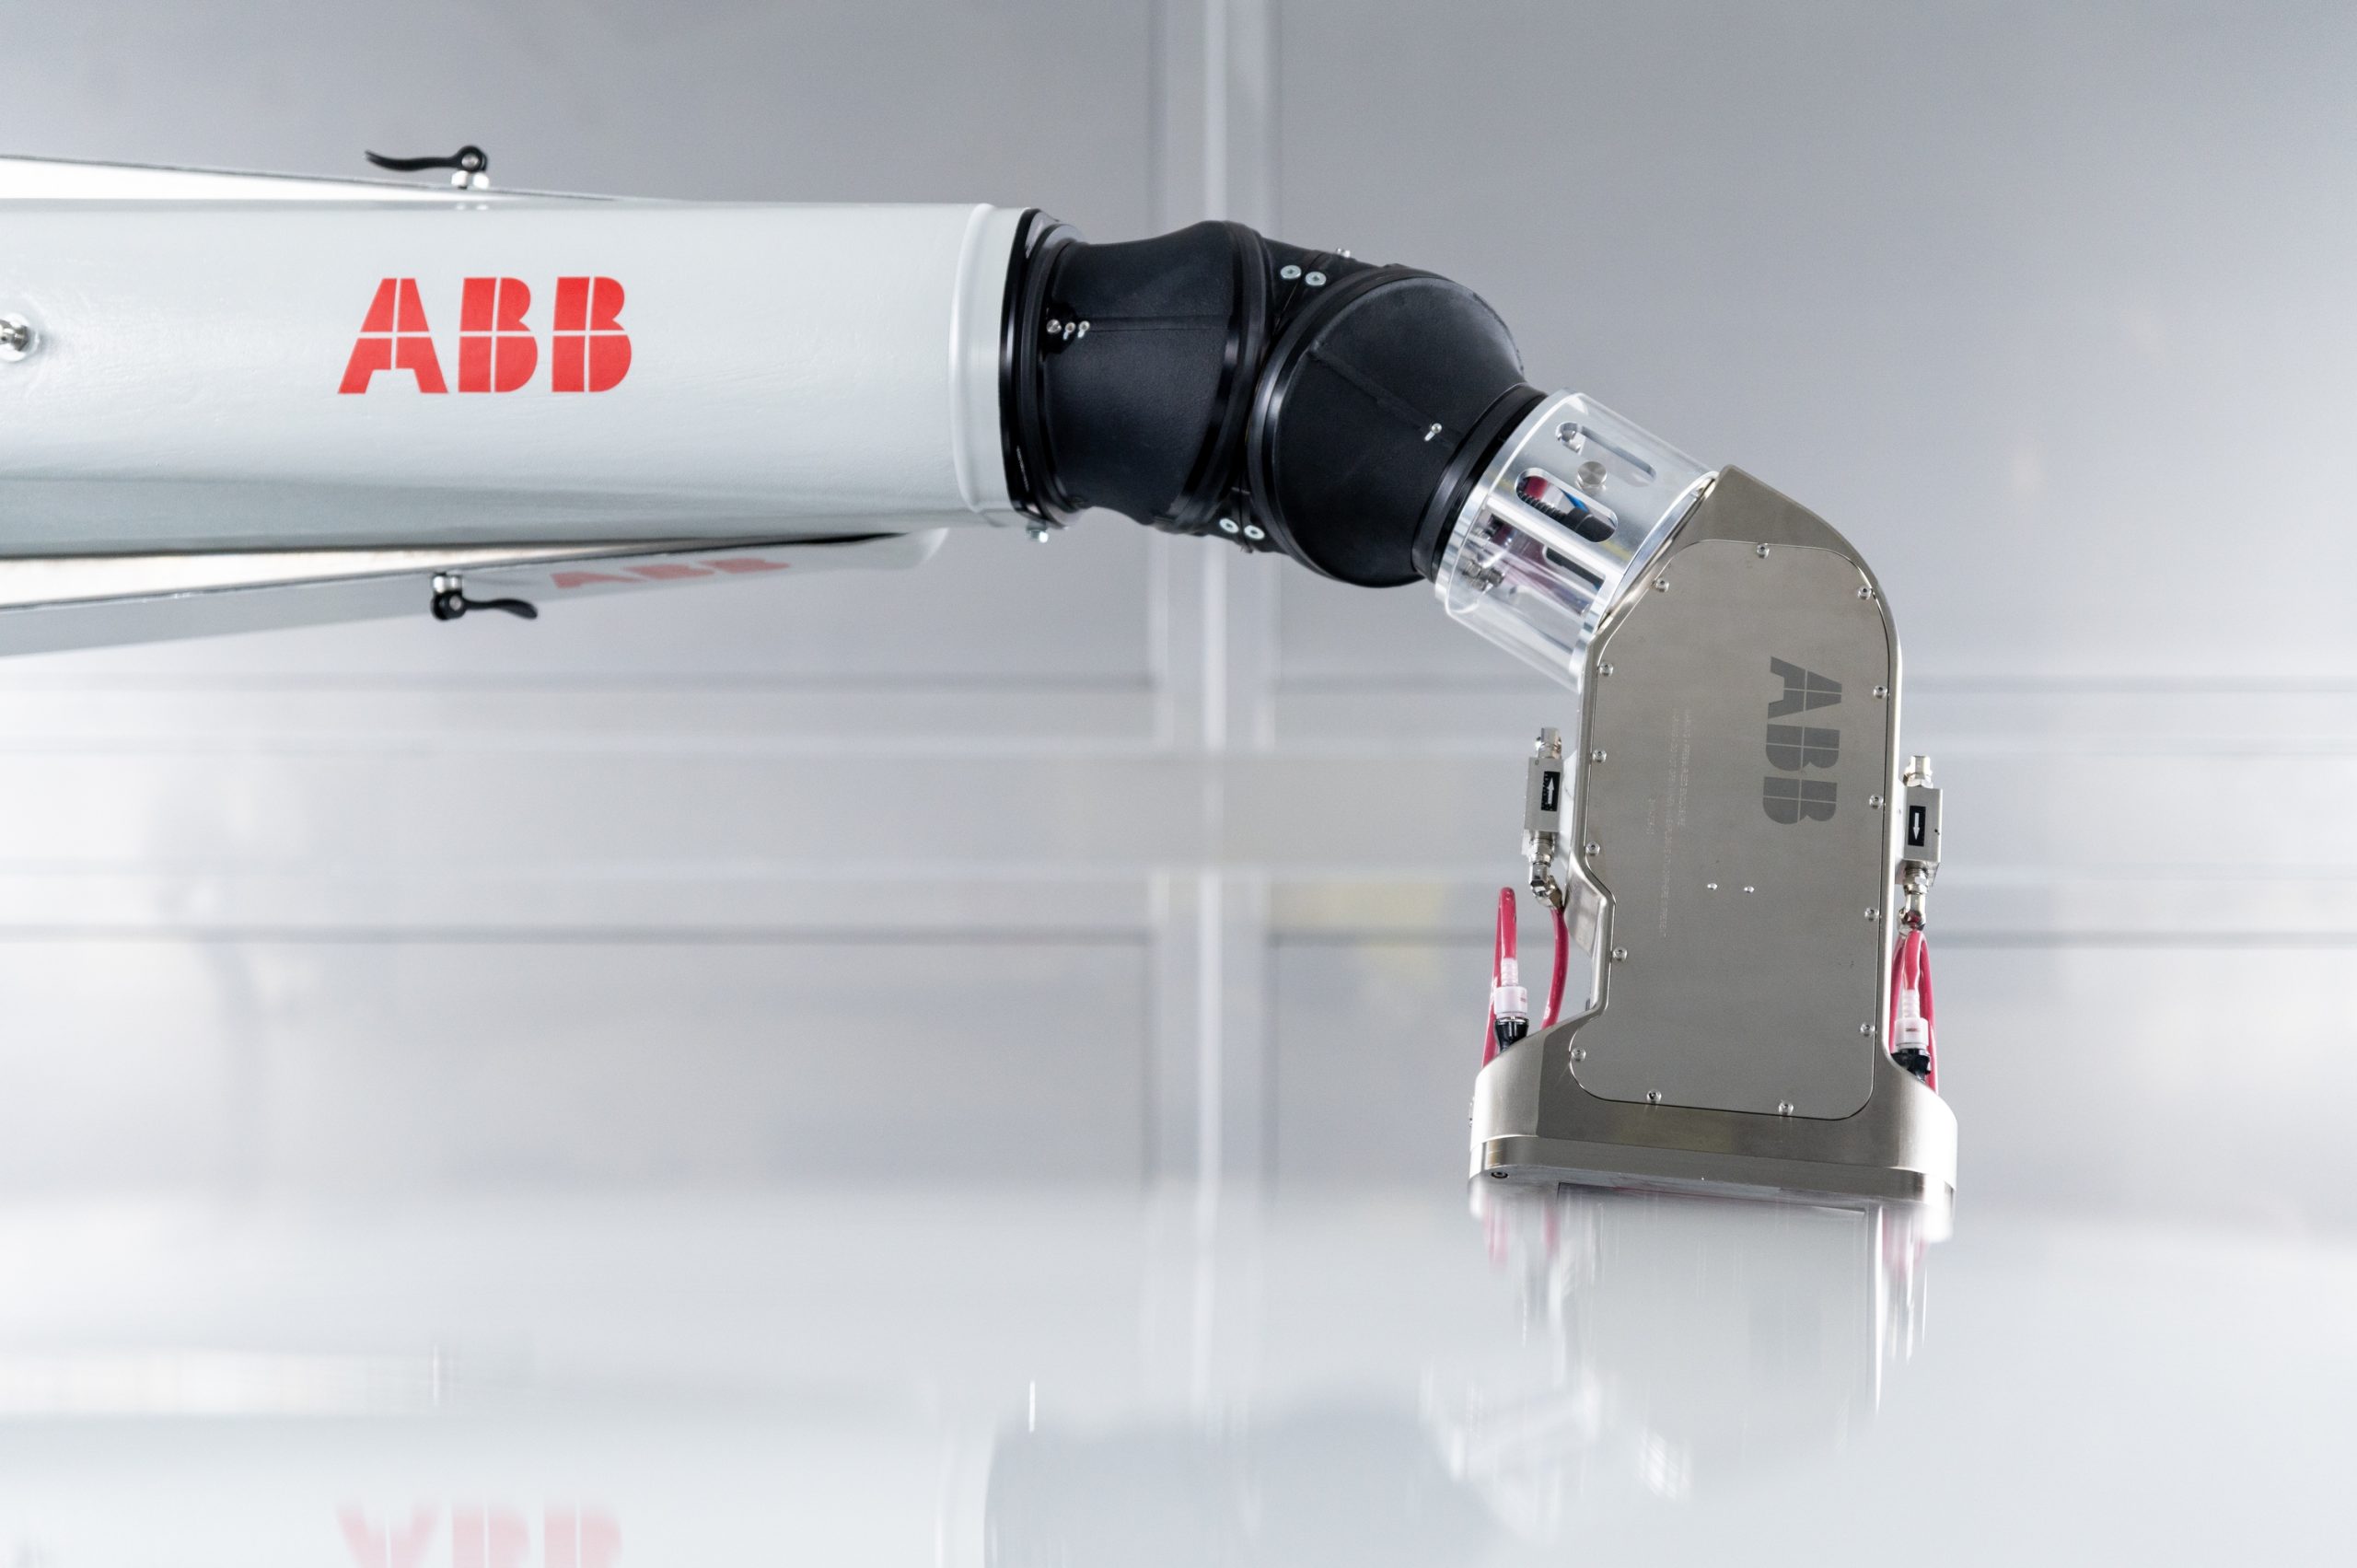 ABB’s PixelPaint selected by Mahindra to deliver premium paint options